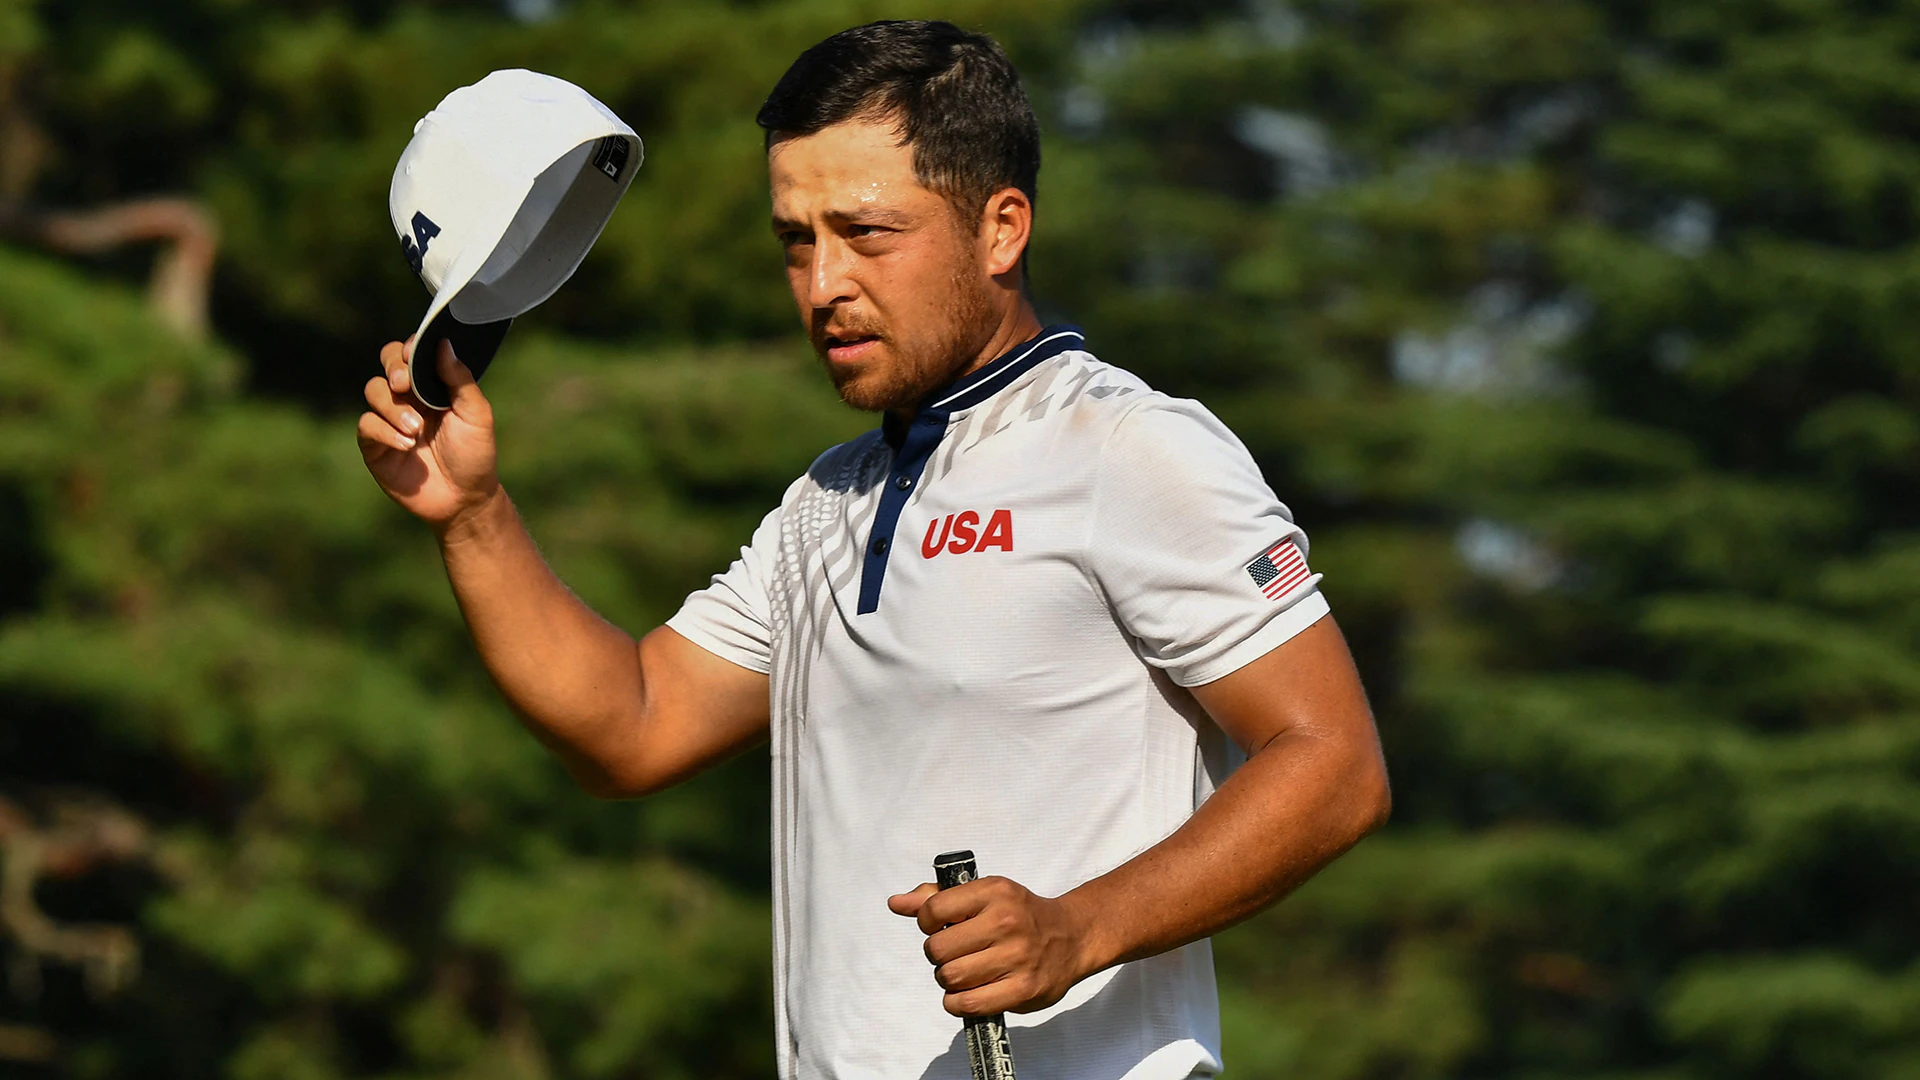 2021 Olympics: Xander Schauffele clings to lead as three Olympic medals up for grabs